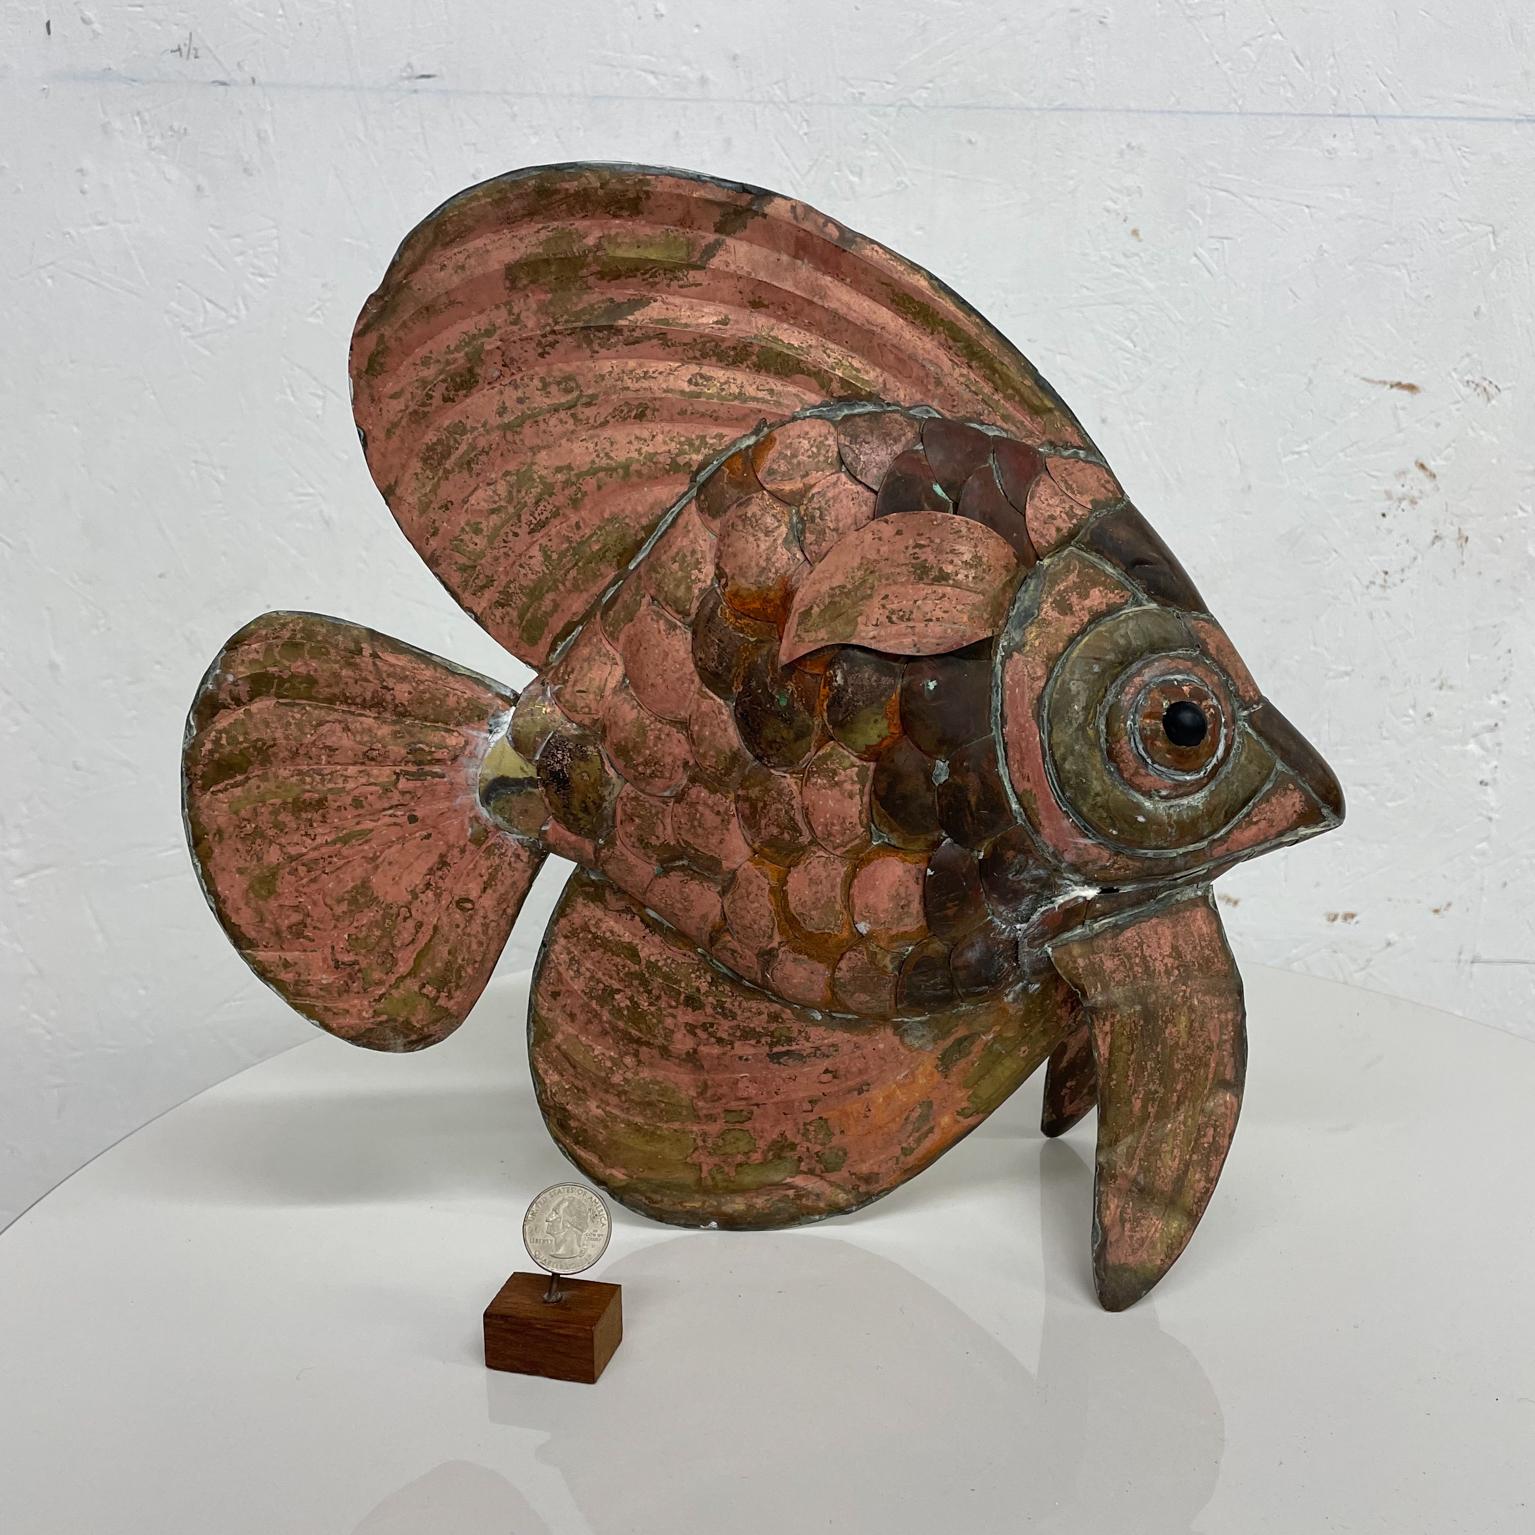 Copper Metal Fish Sculpture
Modern Metal Art Copper FISH Table Sculpture in beautiful colors
Vintage modern in the style of Los Castillo, unmarked.
Measures: 12.25 tall x 12.75 D x 4 W
Preowned original unrestored vintage condition. Patinated